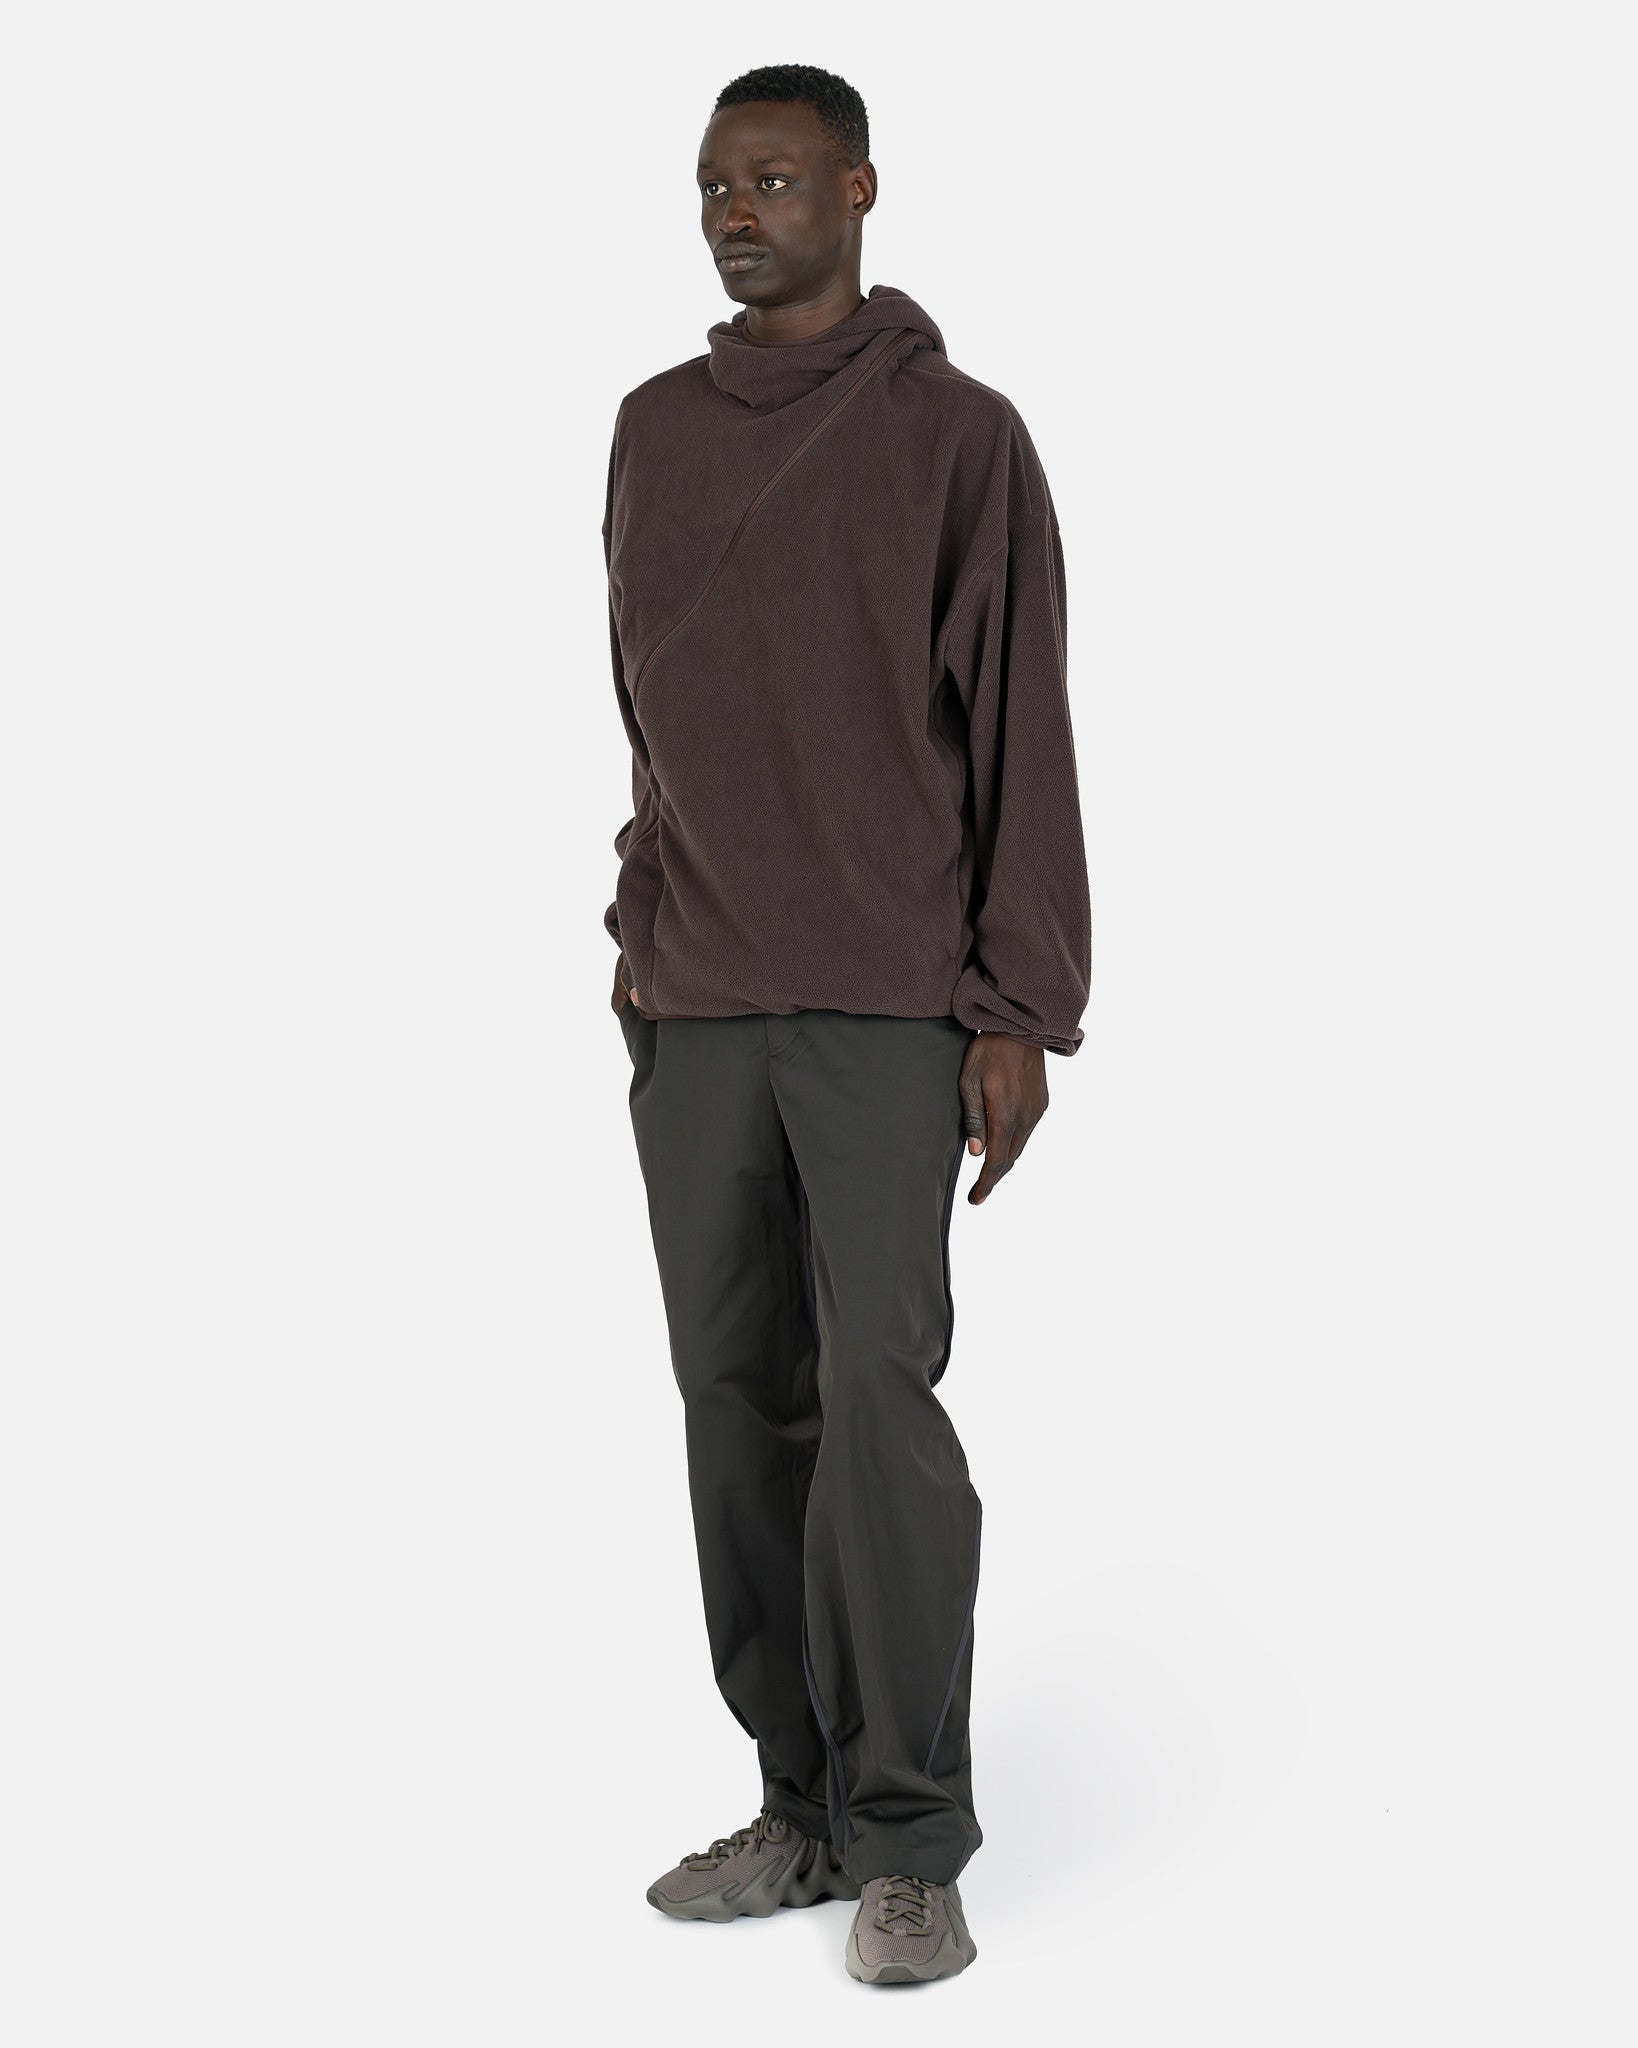 POST ARCHIVE FACTION (P.A.F) Men's Sweatshirts 4.0+ Hoodie Center in Brown